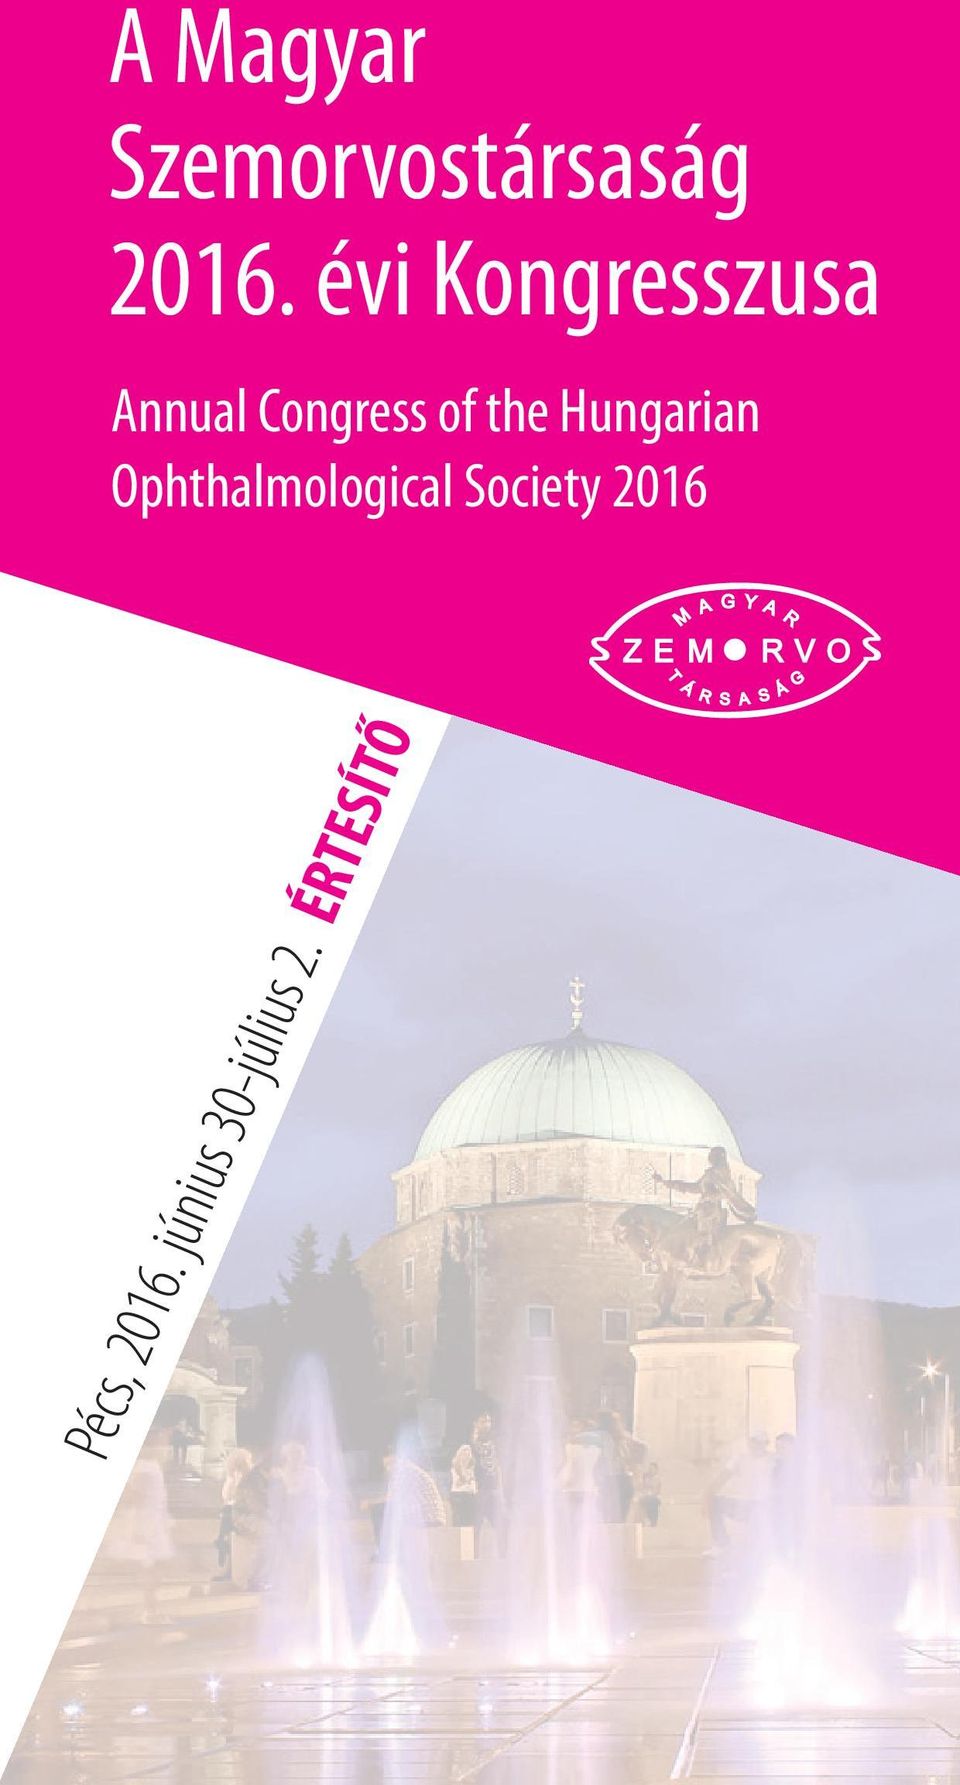 the Hungarian Ophthalmological Society